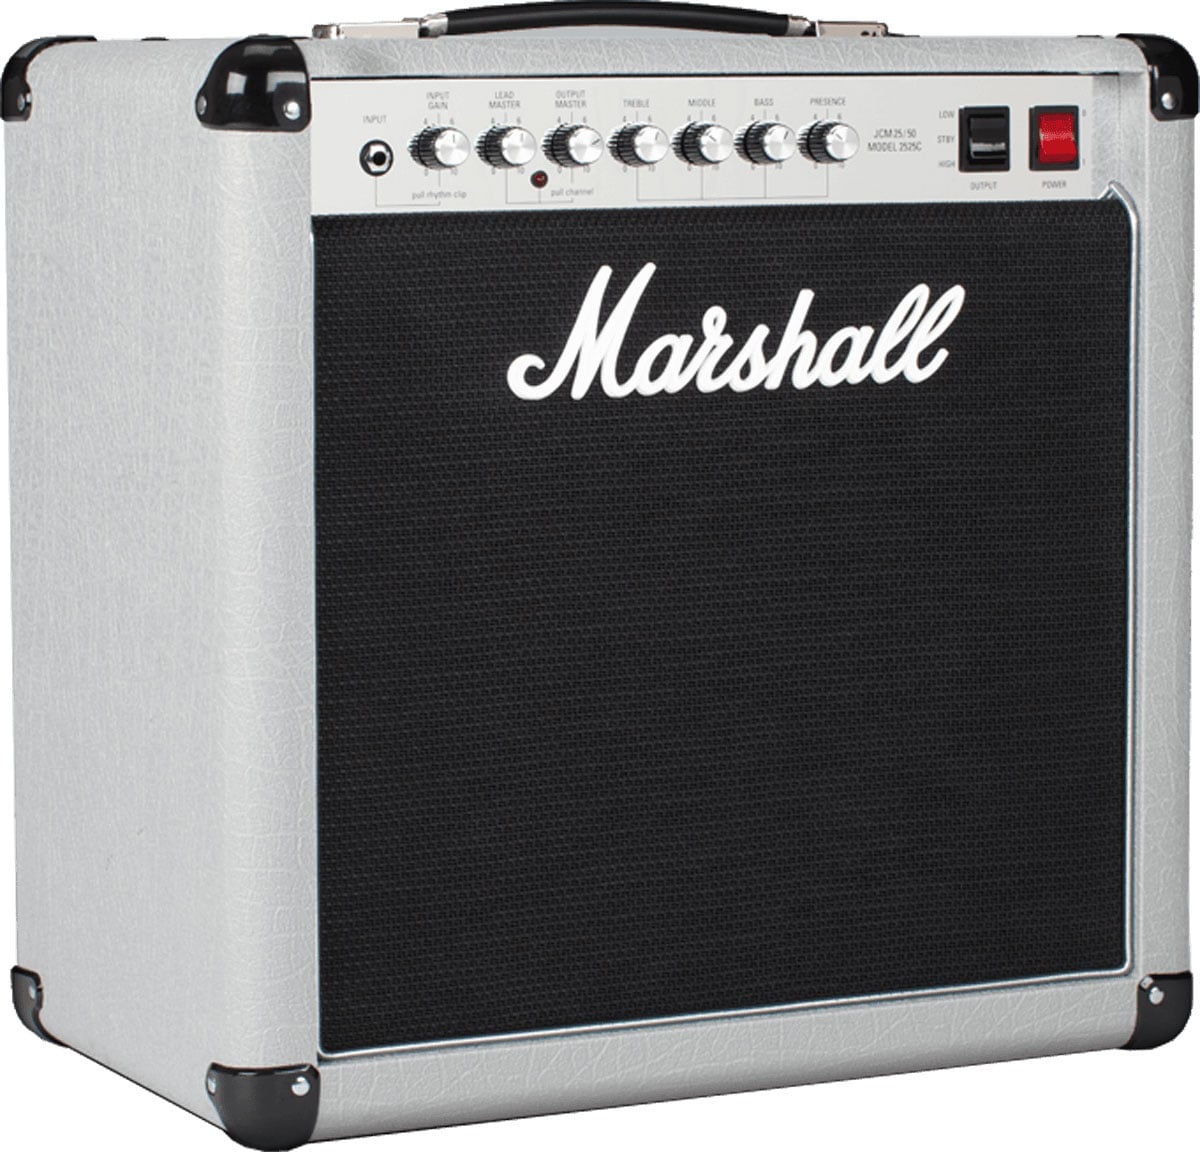 MARSHALL VINTAGE COMBO MINI 20 WATTS SILVER JUBILEE 2525C - RECONDITIONNE